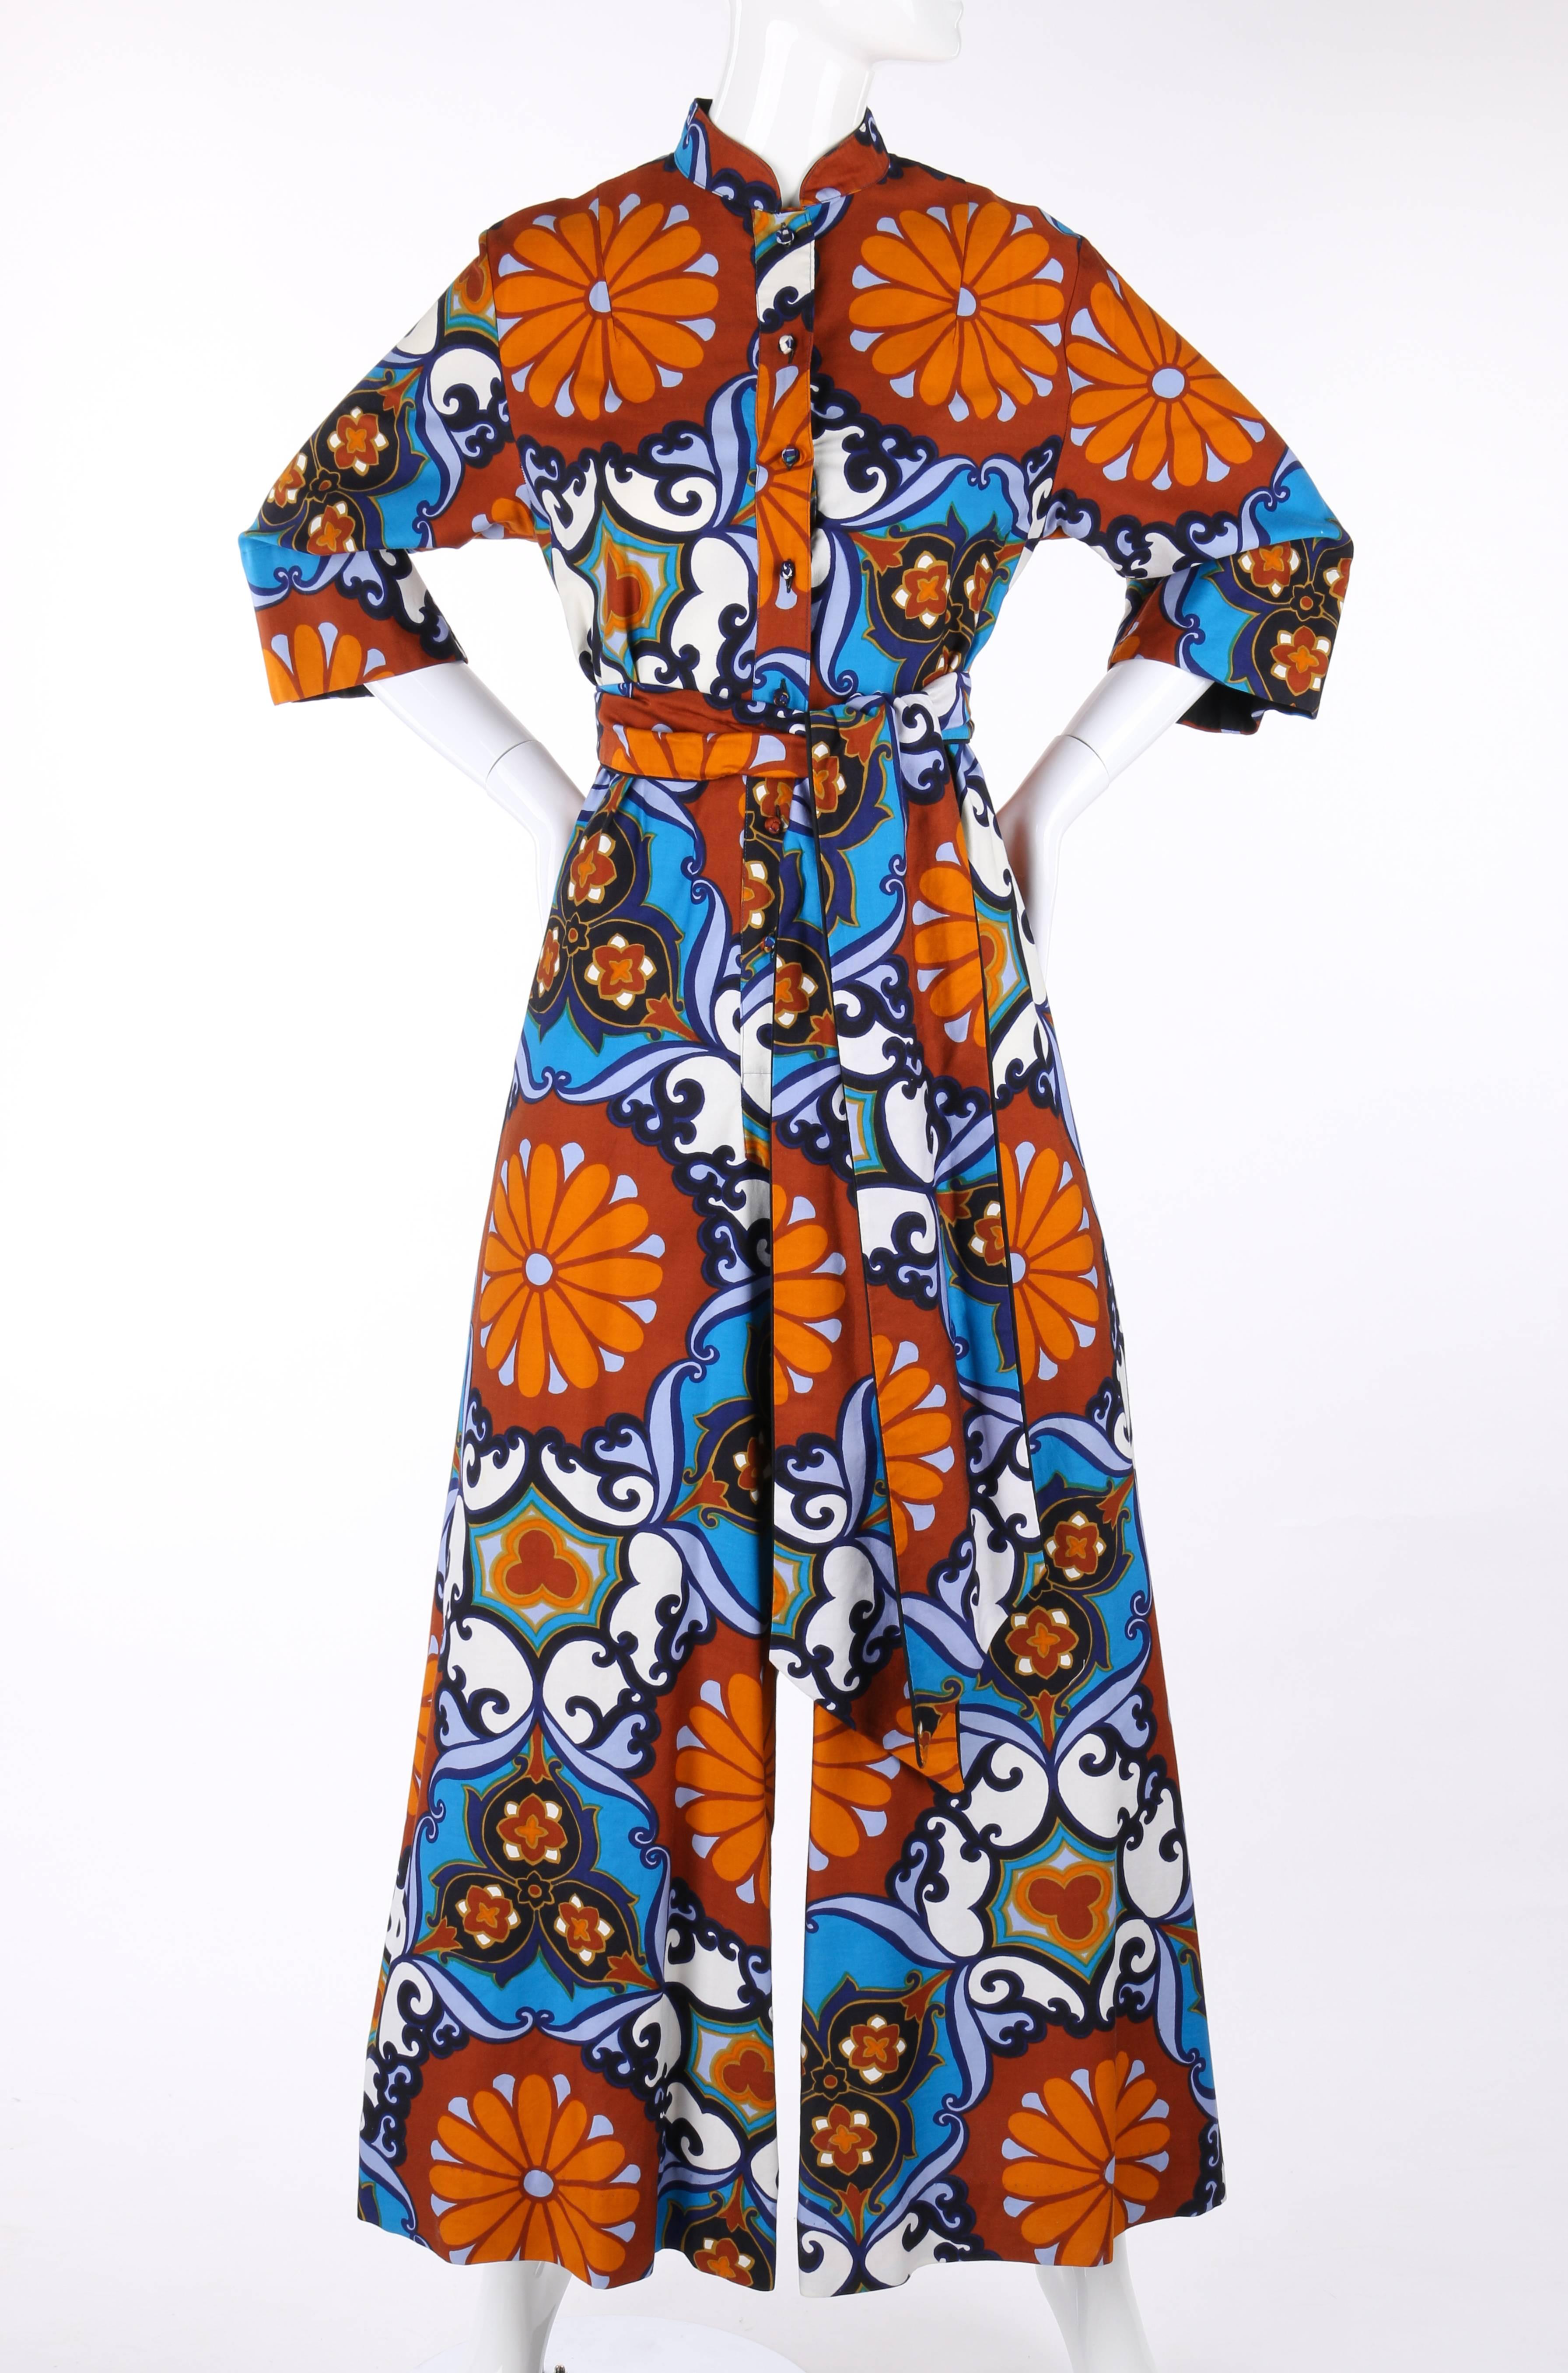 Vintage Penthouse Gallery c.1970's floral print palazzo jumpsuit designed by Catherine Ogust. Multi-color floral print cotton in shades of brown, orange, blue, green, and white. Mandarin collar. Seven center front button closures. Matching fabric